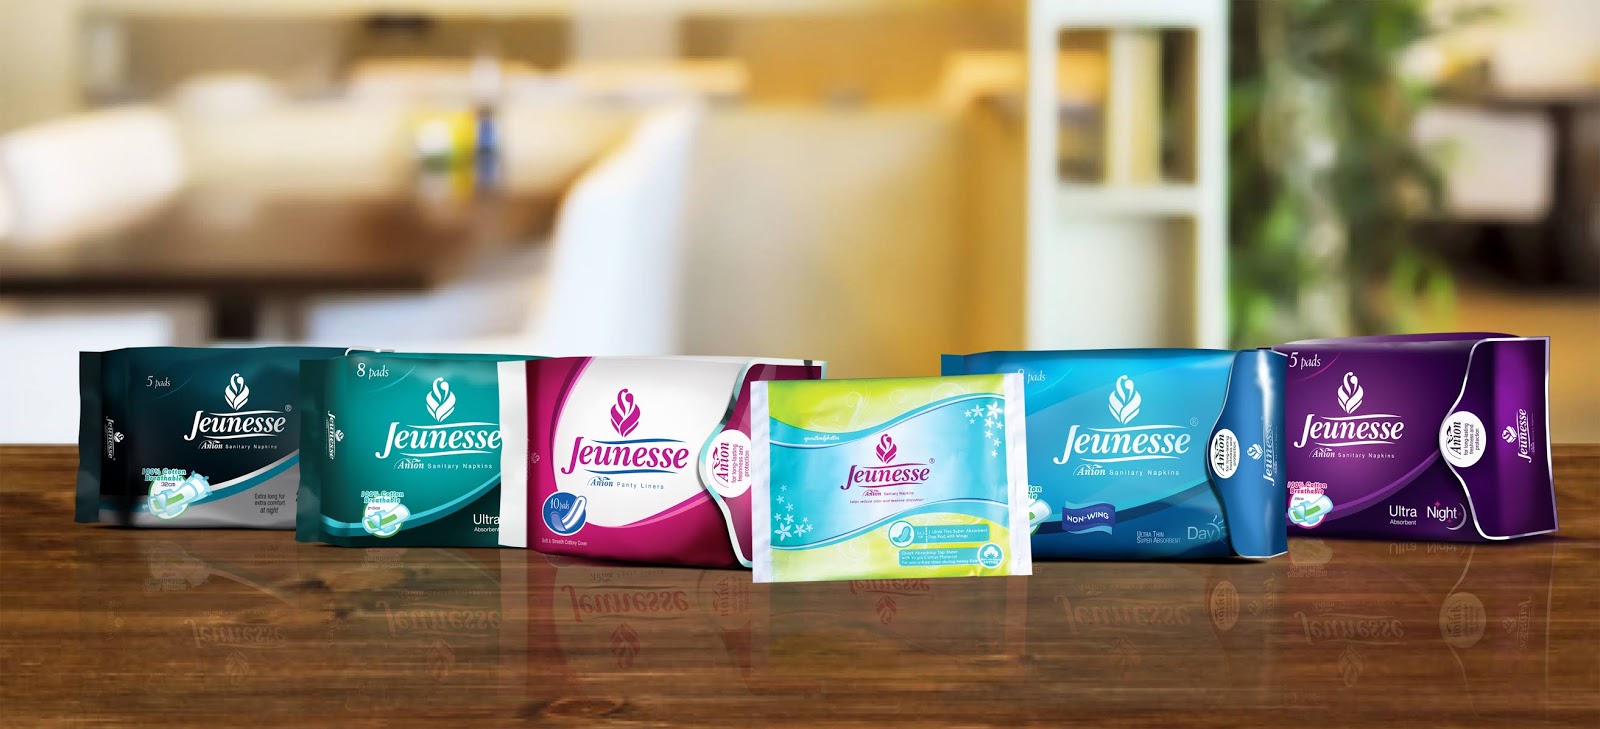  Jeunesse Anion Sanitary Pads and Liner